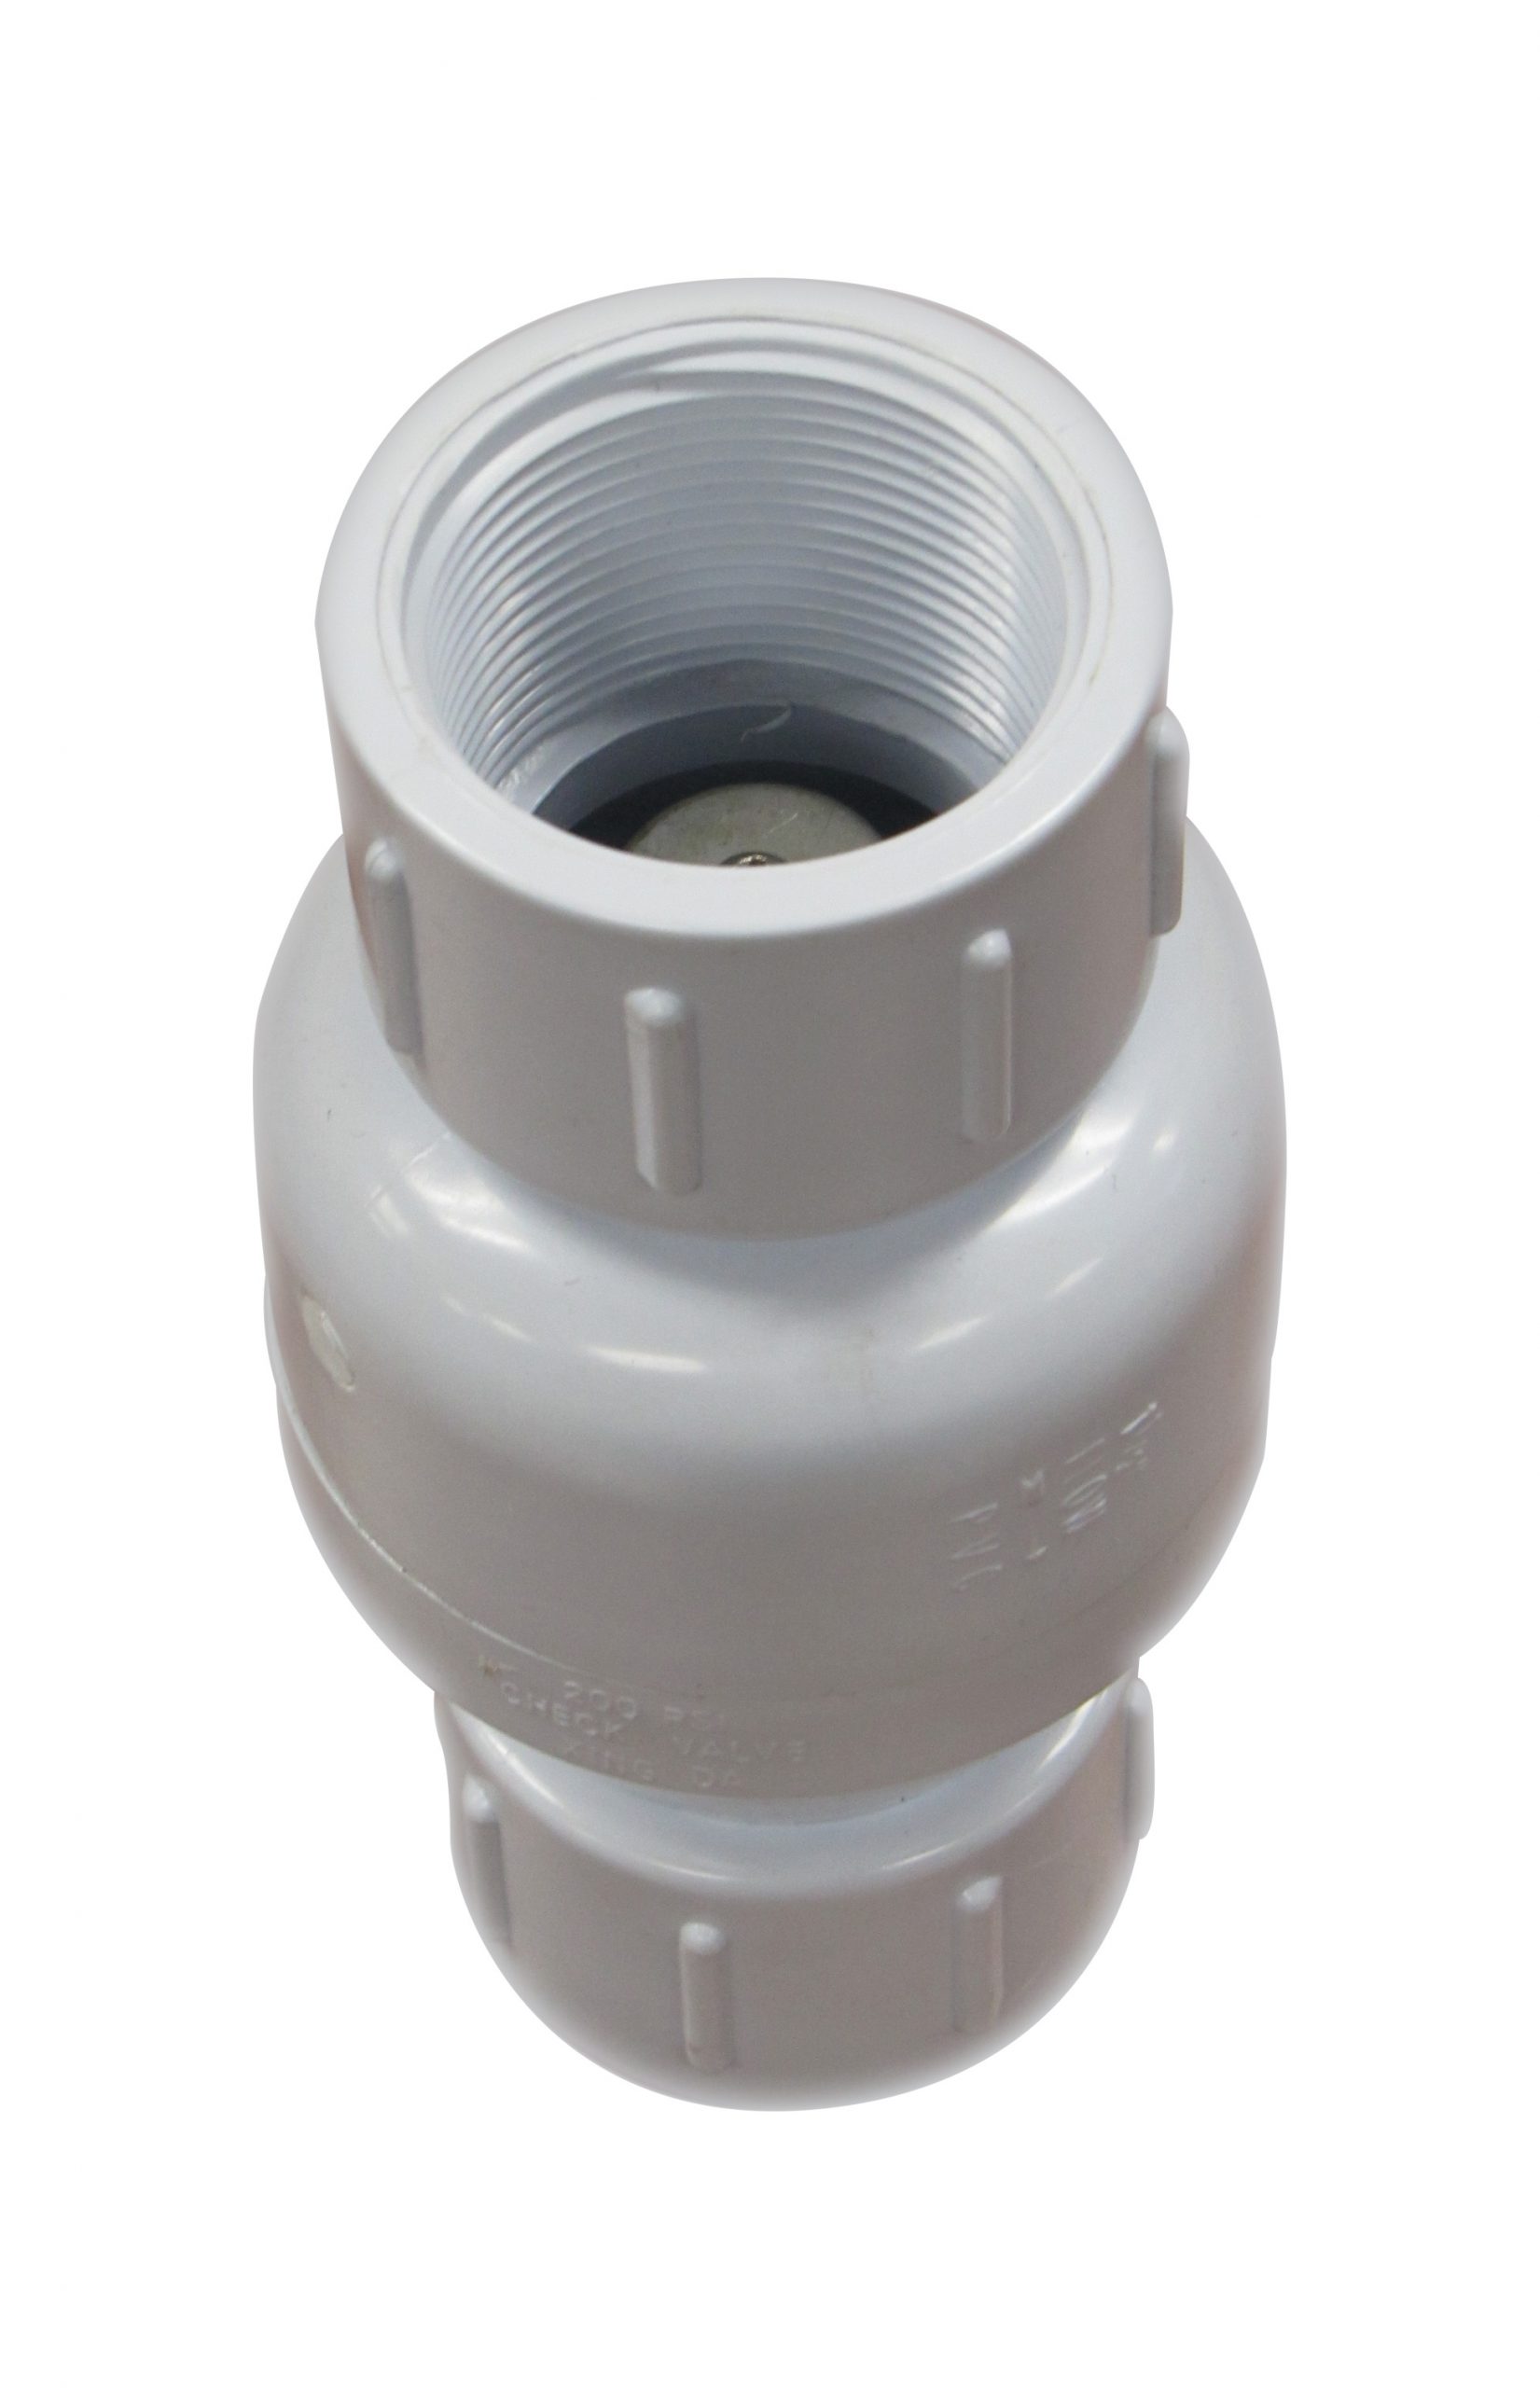 1.5 inch PVC Check Valve with Spring Female Sockets - Our Pool Store